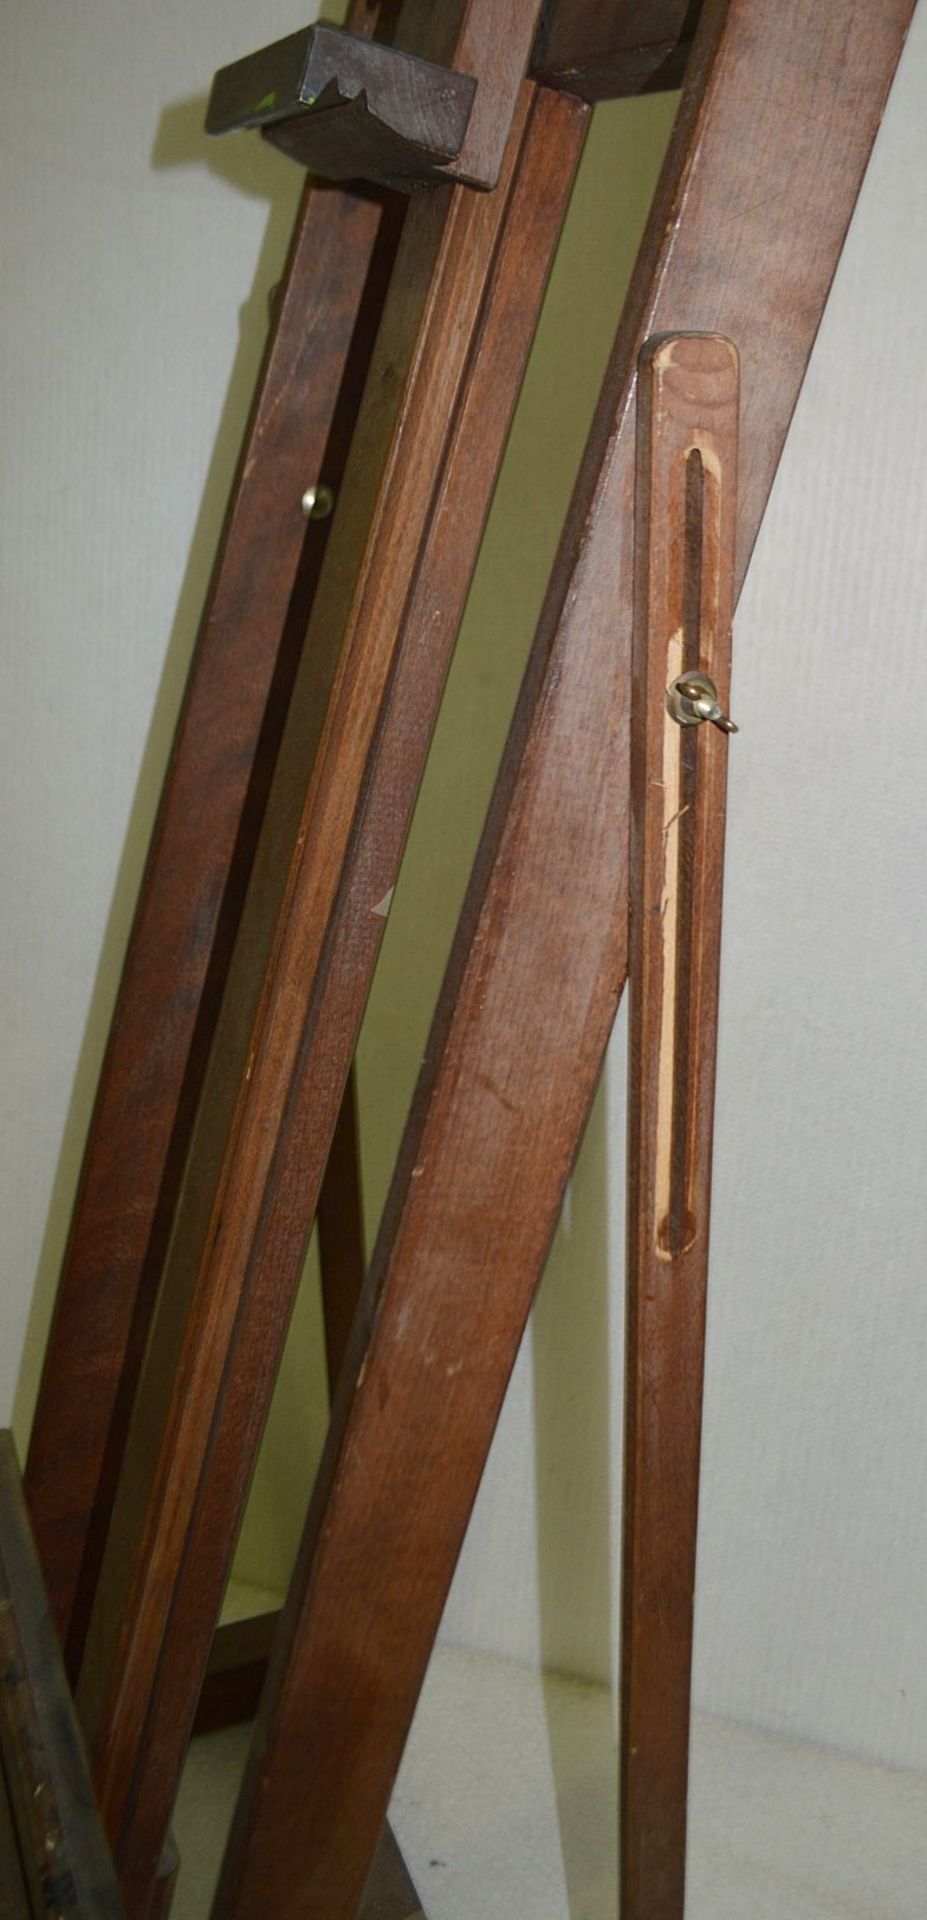 1 x Vintage Wooden Easel Display Prop - Dimensions (as pictured): H147 x W58 x D50cm - Ex-Showroom - Image 5 of 6